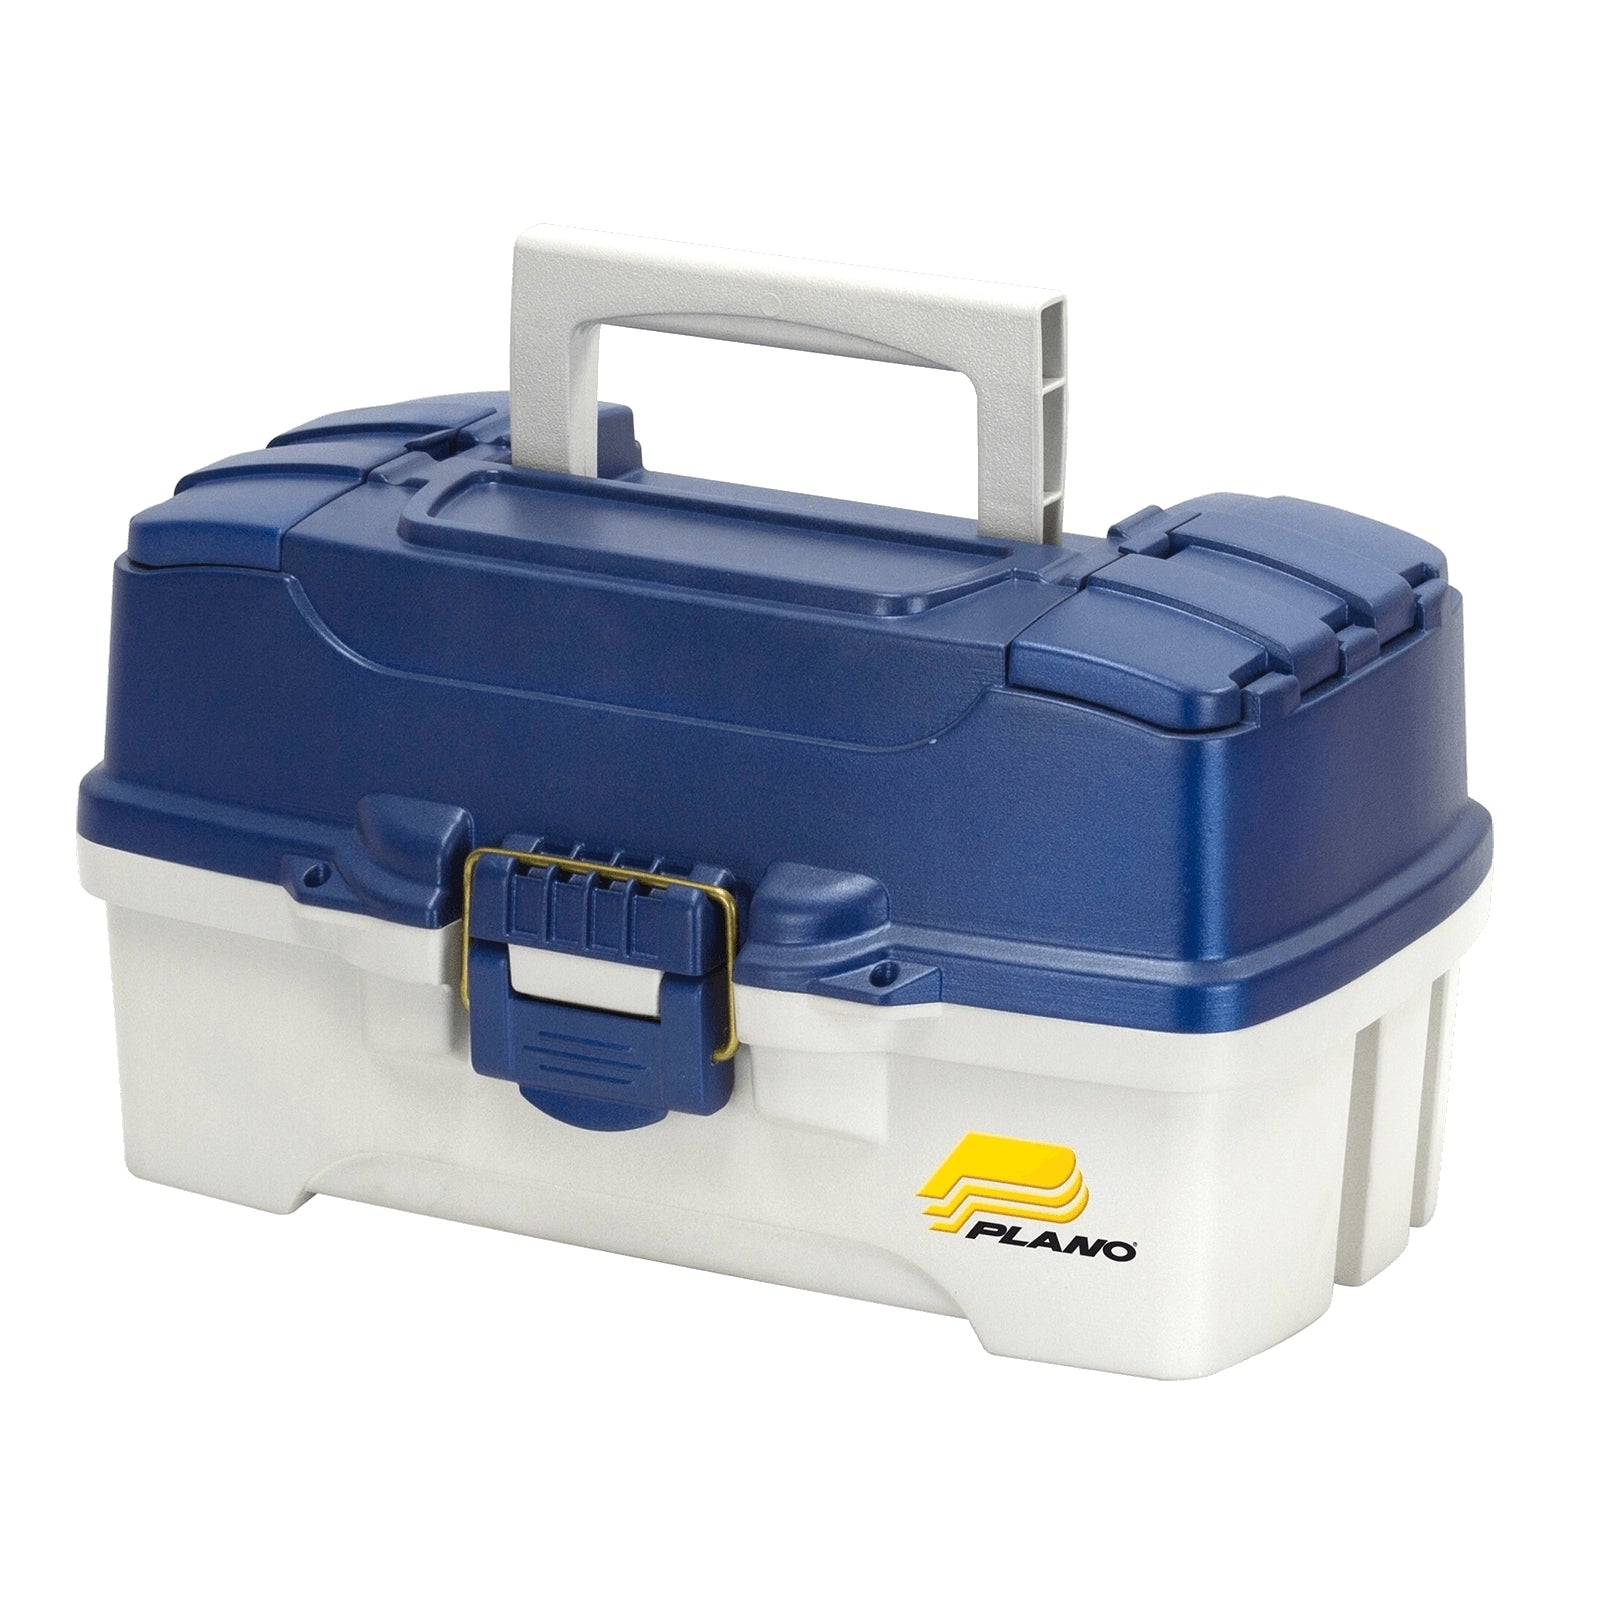 fantom Vandre græs Plano Two-Tray Tackle Box – Avinet Research Supplies